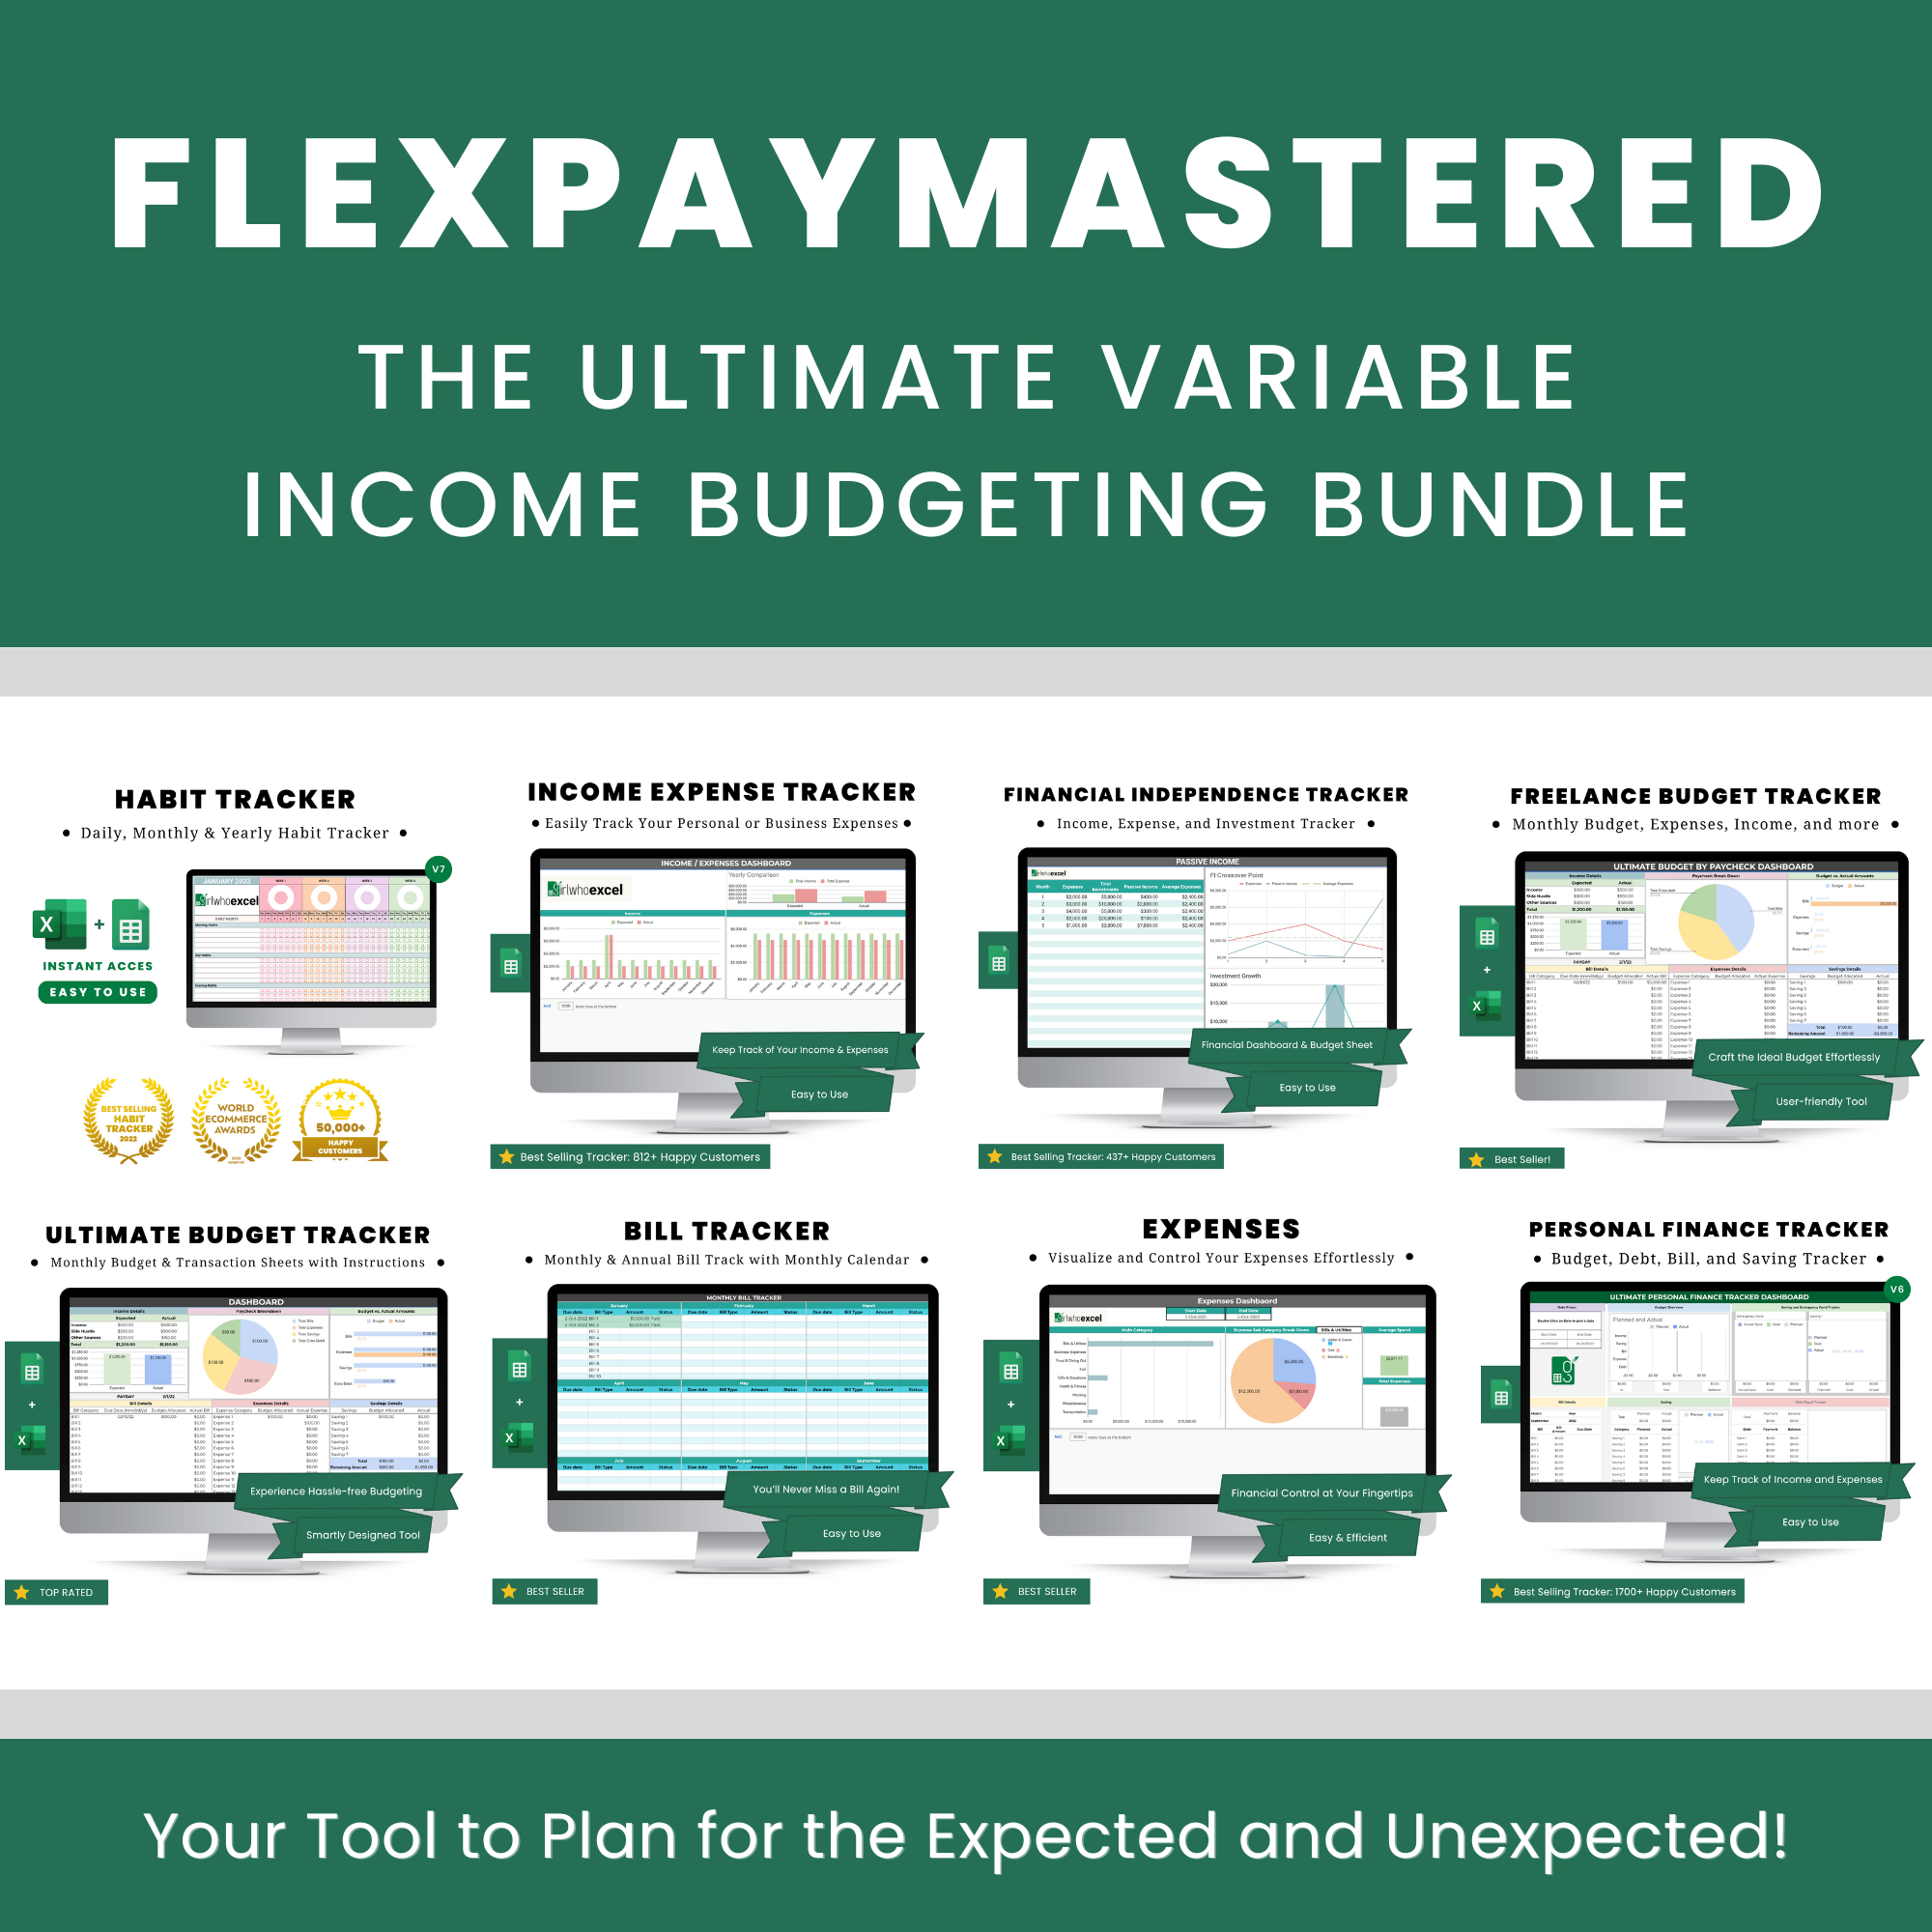 FlexPayMastered: The Ultimate Variable Income Budgeting Bundle